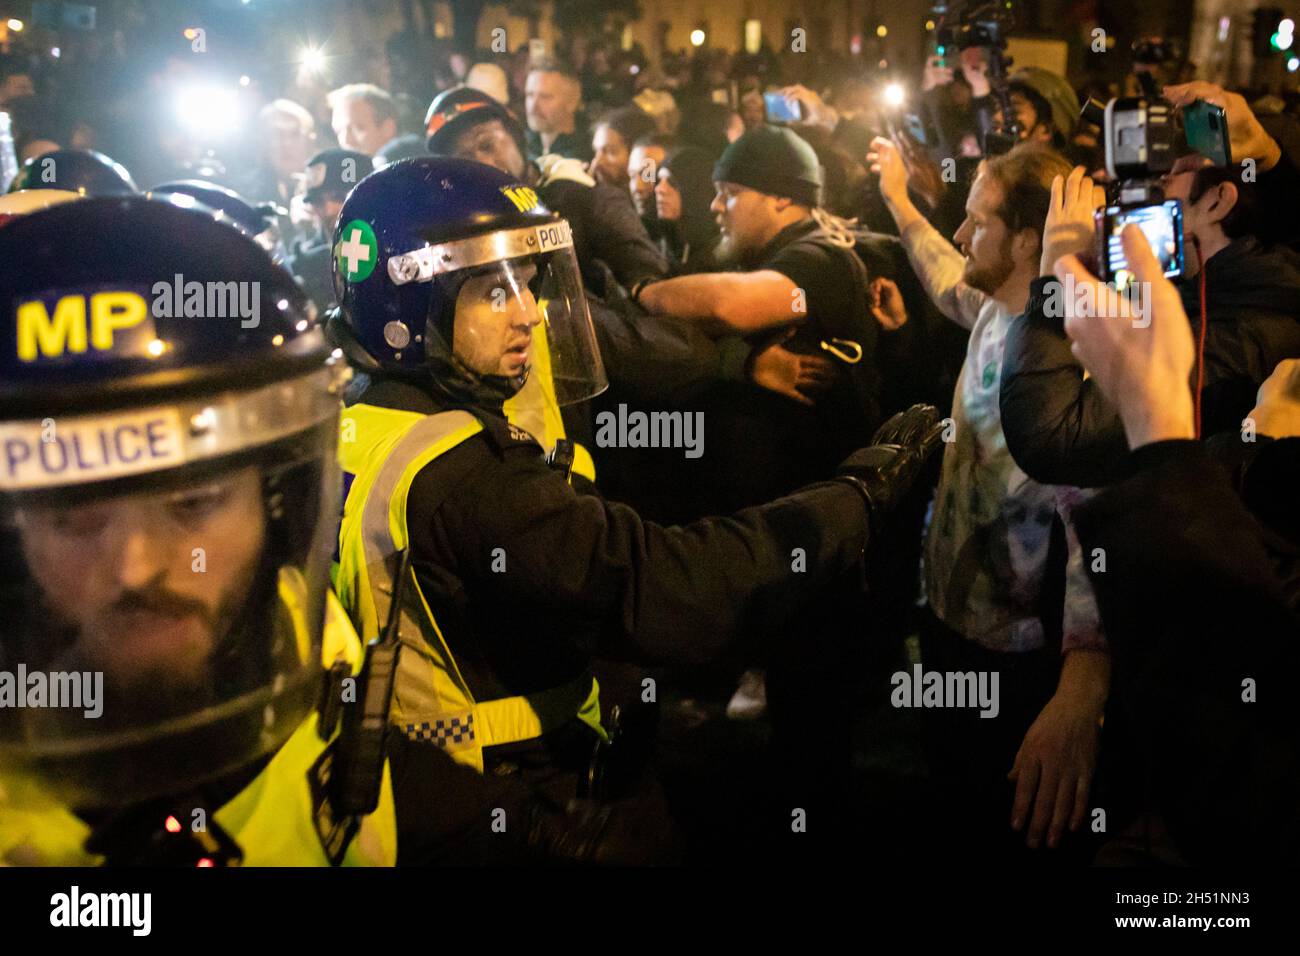 London, UK. 05th Nov, 2021. Police clash with protesters as they move in outside the Houses of Parliament during the annual Million Mask march through the city. The Anonymous movement stands in solidarity for a society which is marginalised by the political elite and associated corporations. Credit: Andy Barton/Alamy Live News Stock Photo